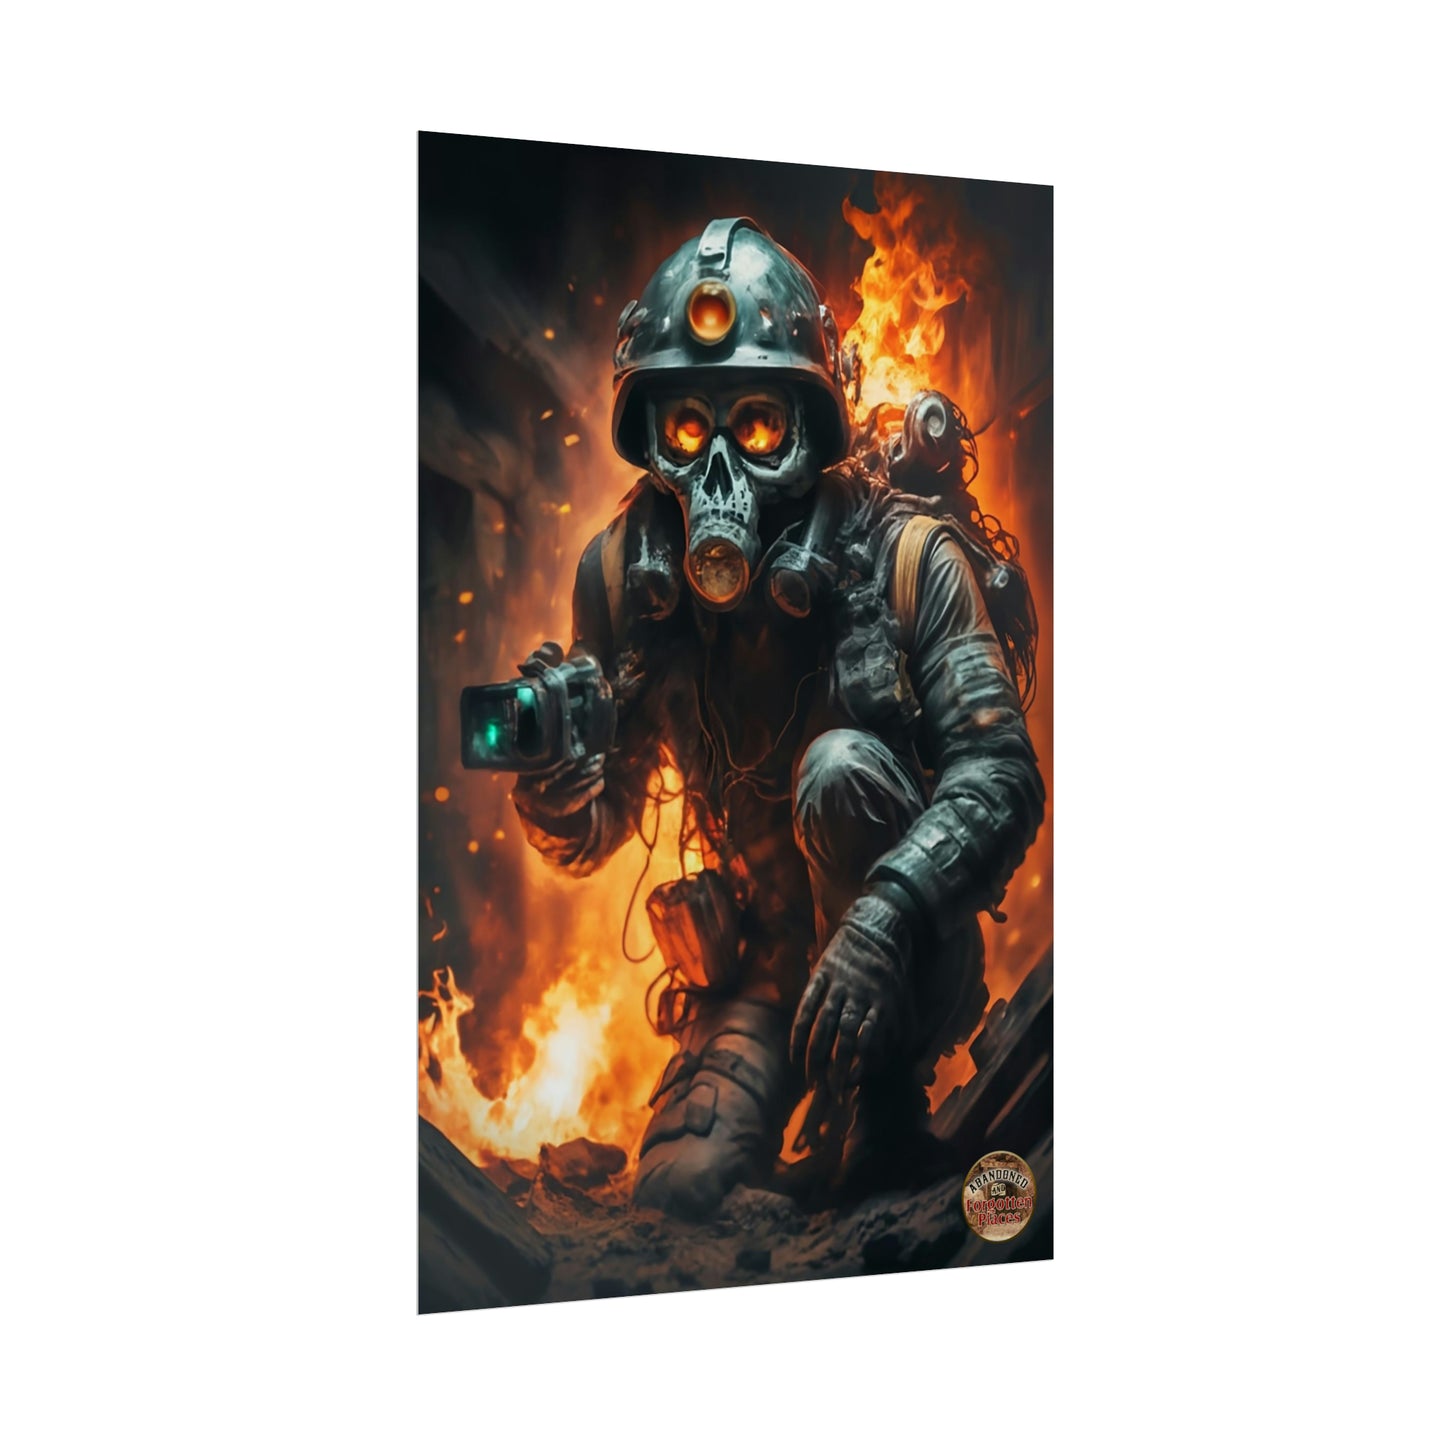 A&FP Skull Poster Art Collection